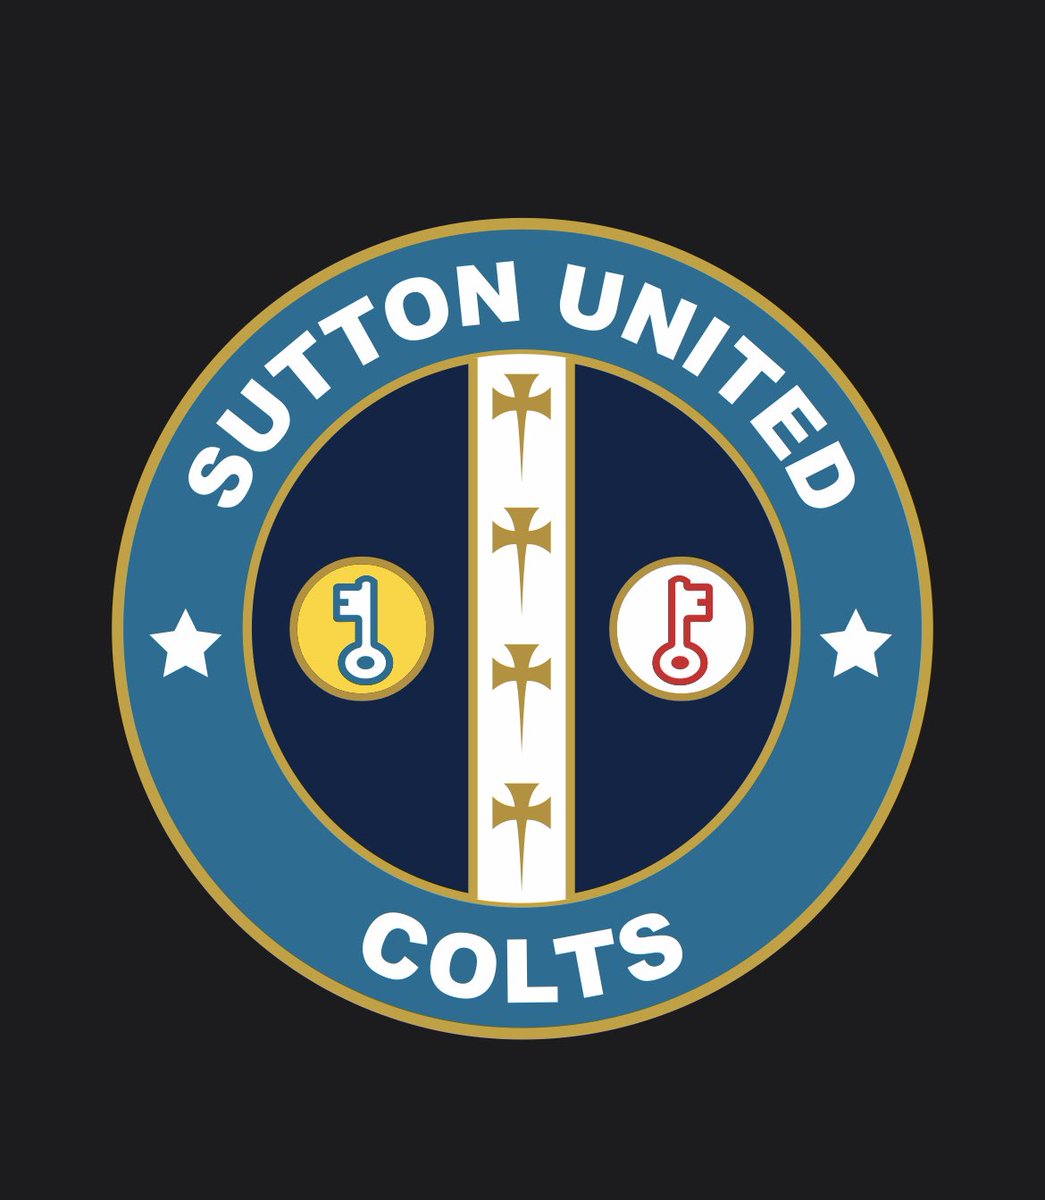 ASSISTANT MANAGER VACANCY
Our U15 team for the 24/25 season are looking to recruit an experienced Assistant Manager.The team play in the Premier Elite division Training is a Wednesday evening and games on a Sunday. To register your email andy.harris@suttonunited.net @suttonunited